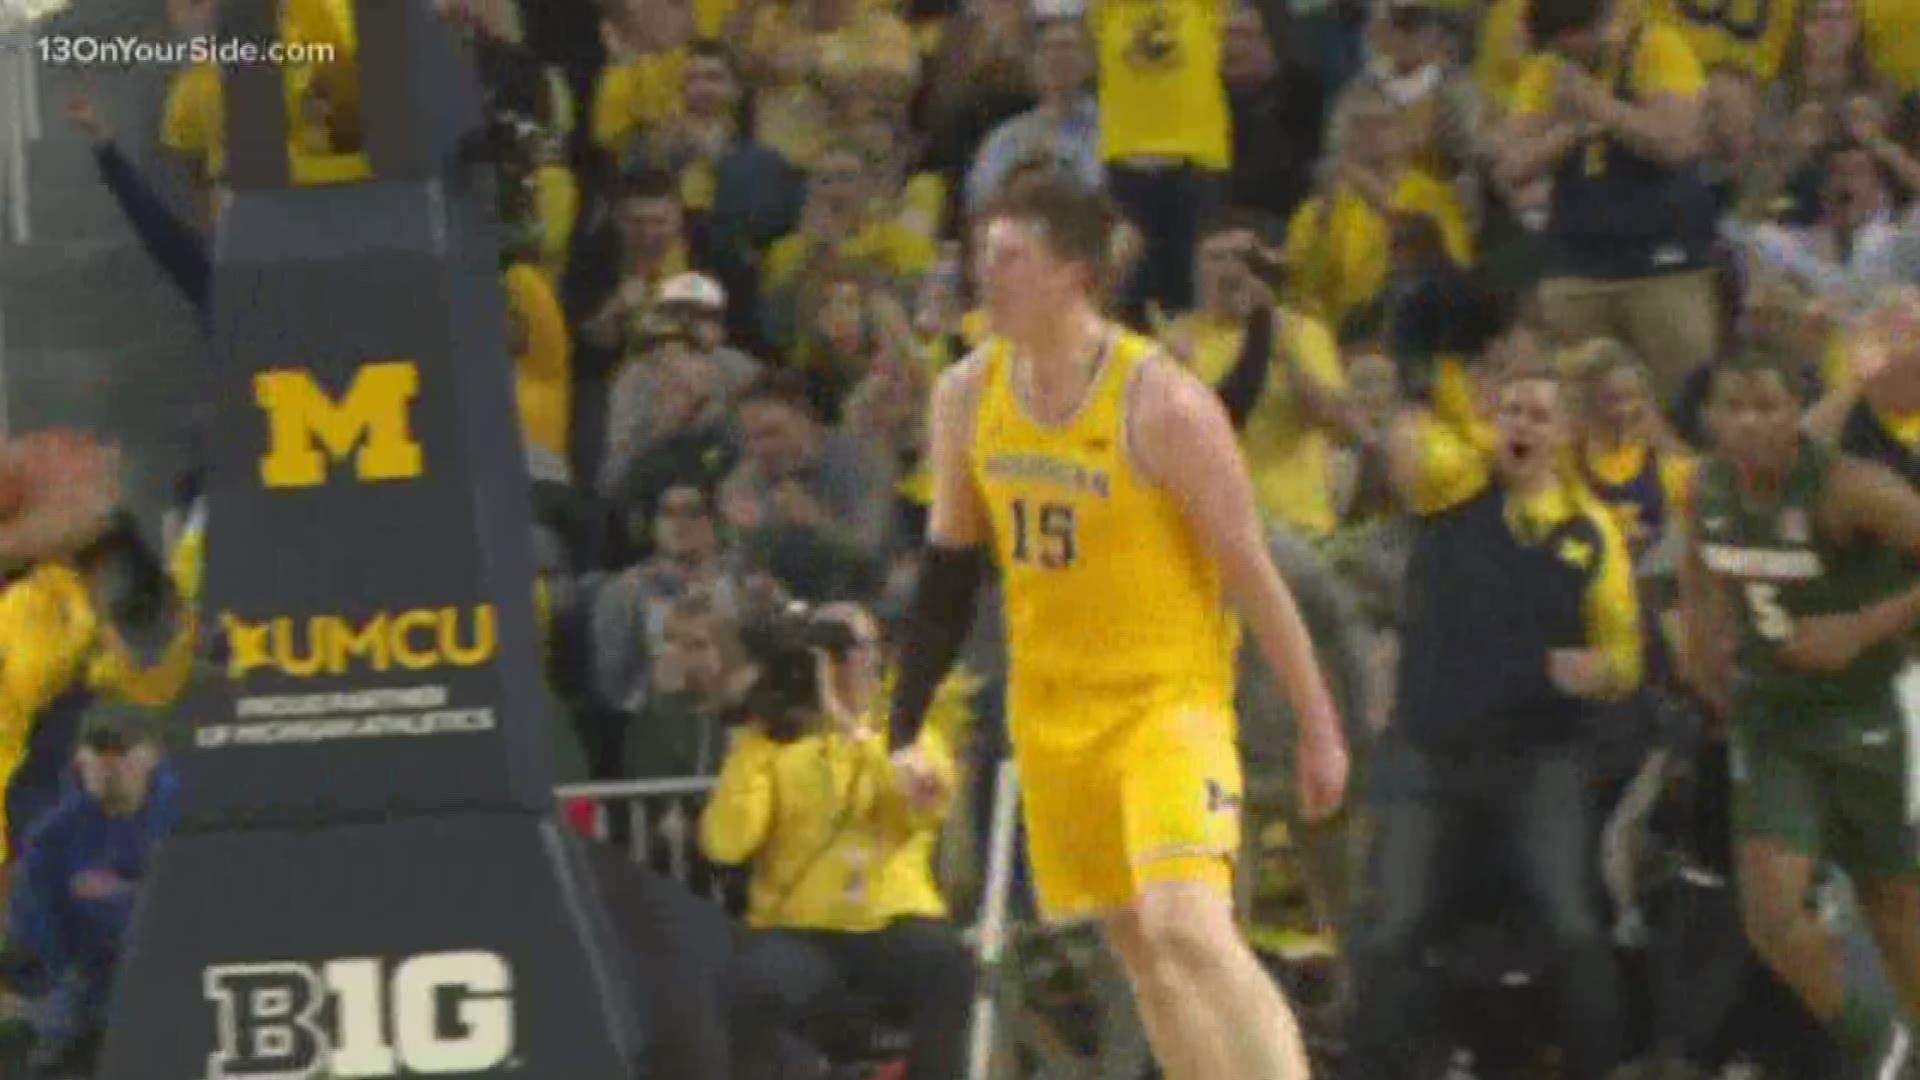 Juwan Howard gets his first coaching win over the Spartans as Michigan takes it 77-68.